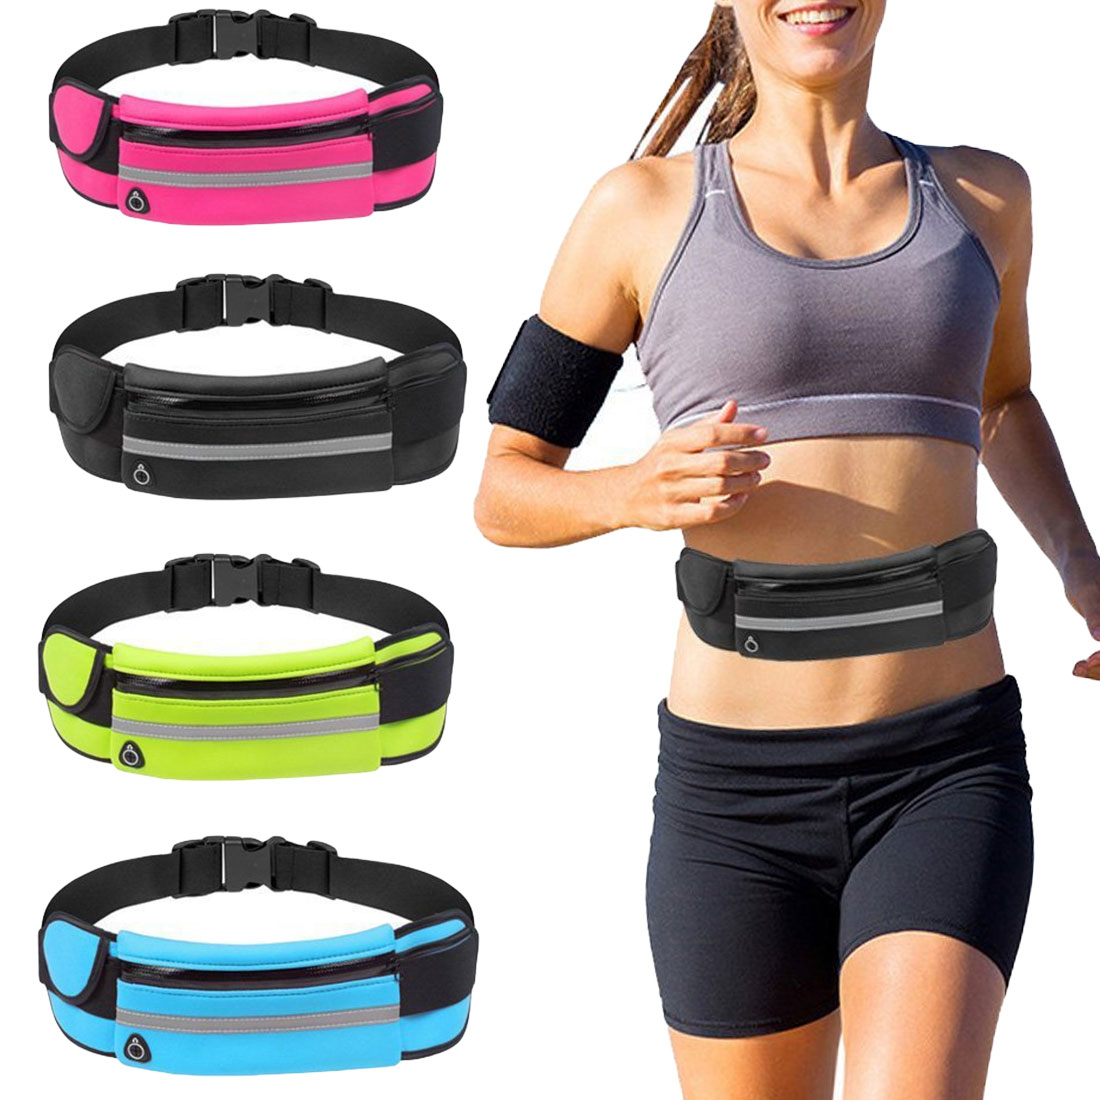 New Running Waist Bag Waterproof Phone Container Jogging Hiking Belt Belly Bag Women Gym Fitness Bag Lady Sport Accessories